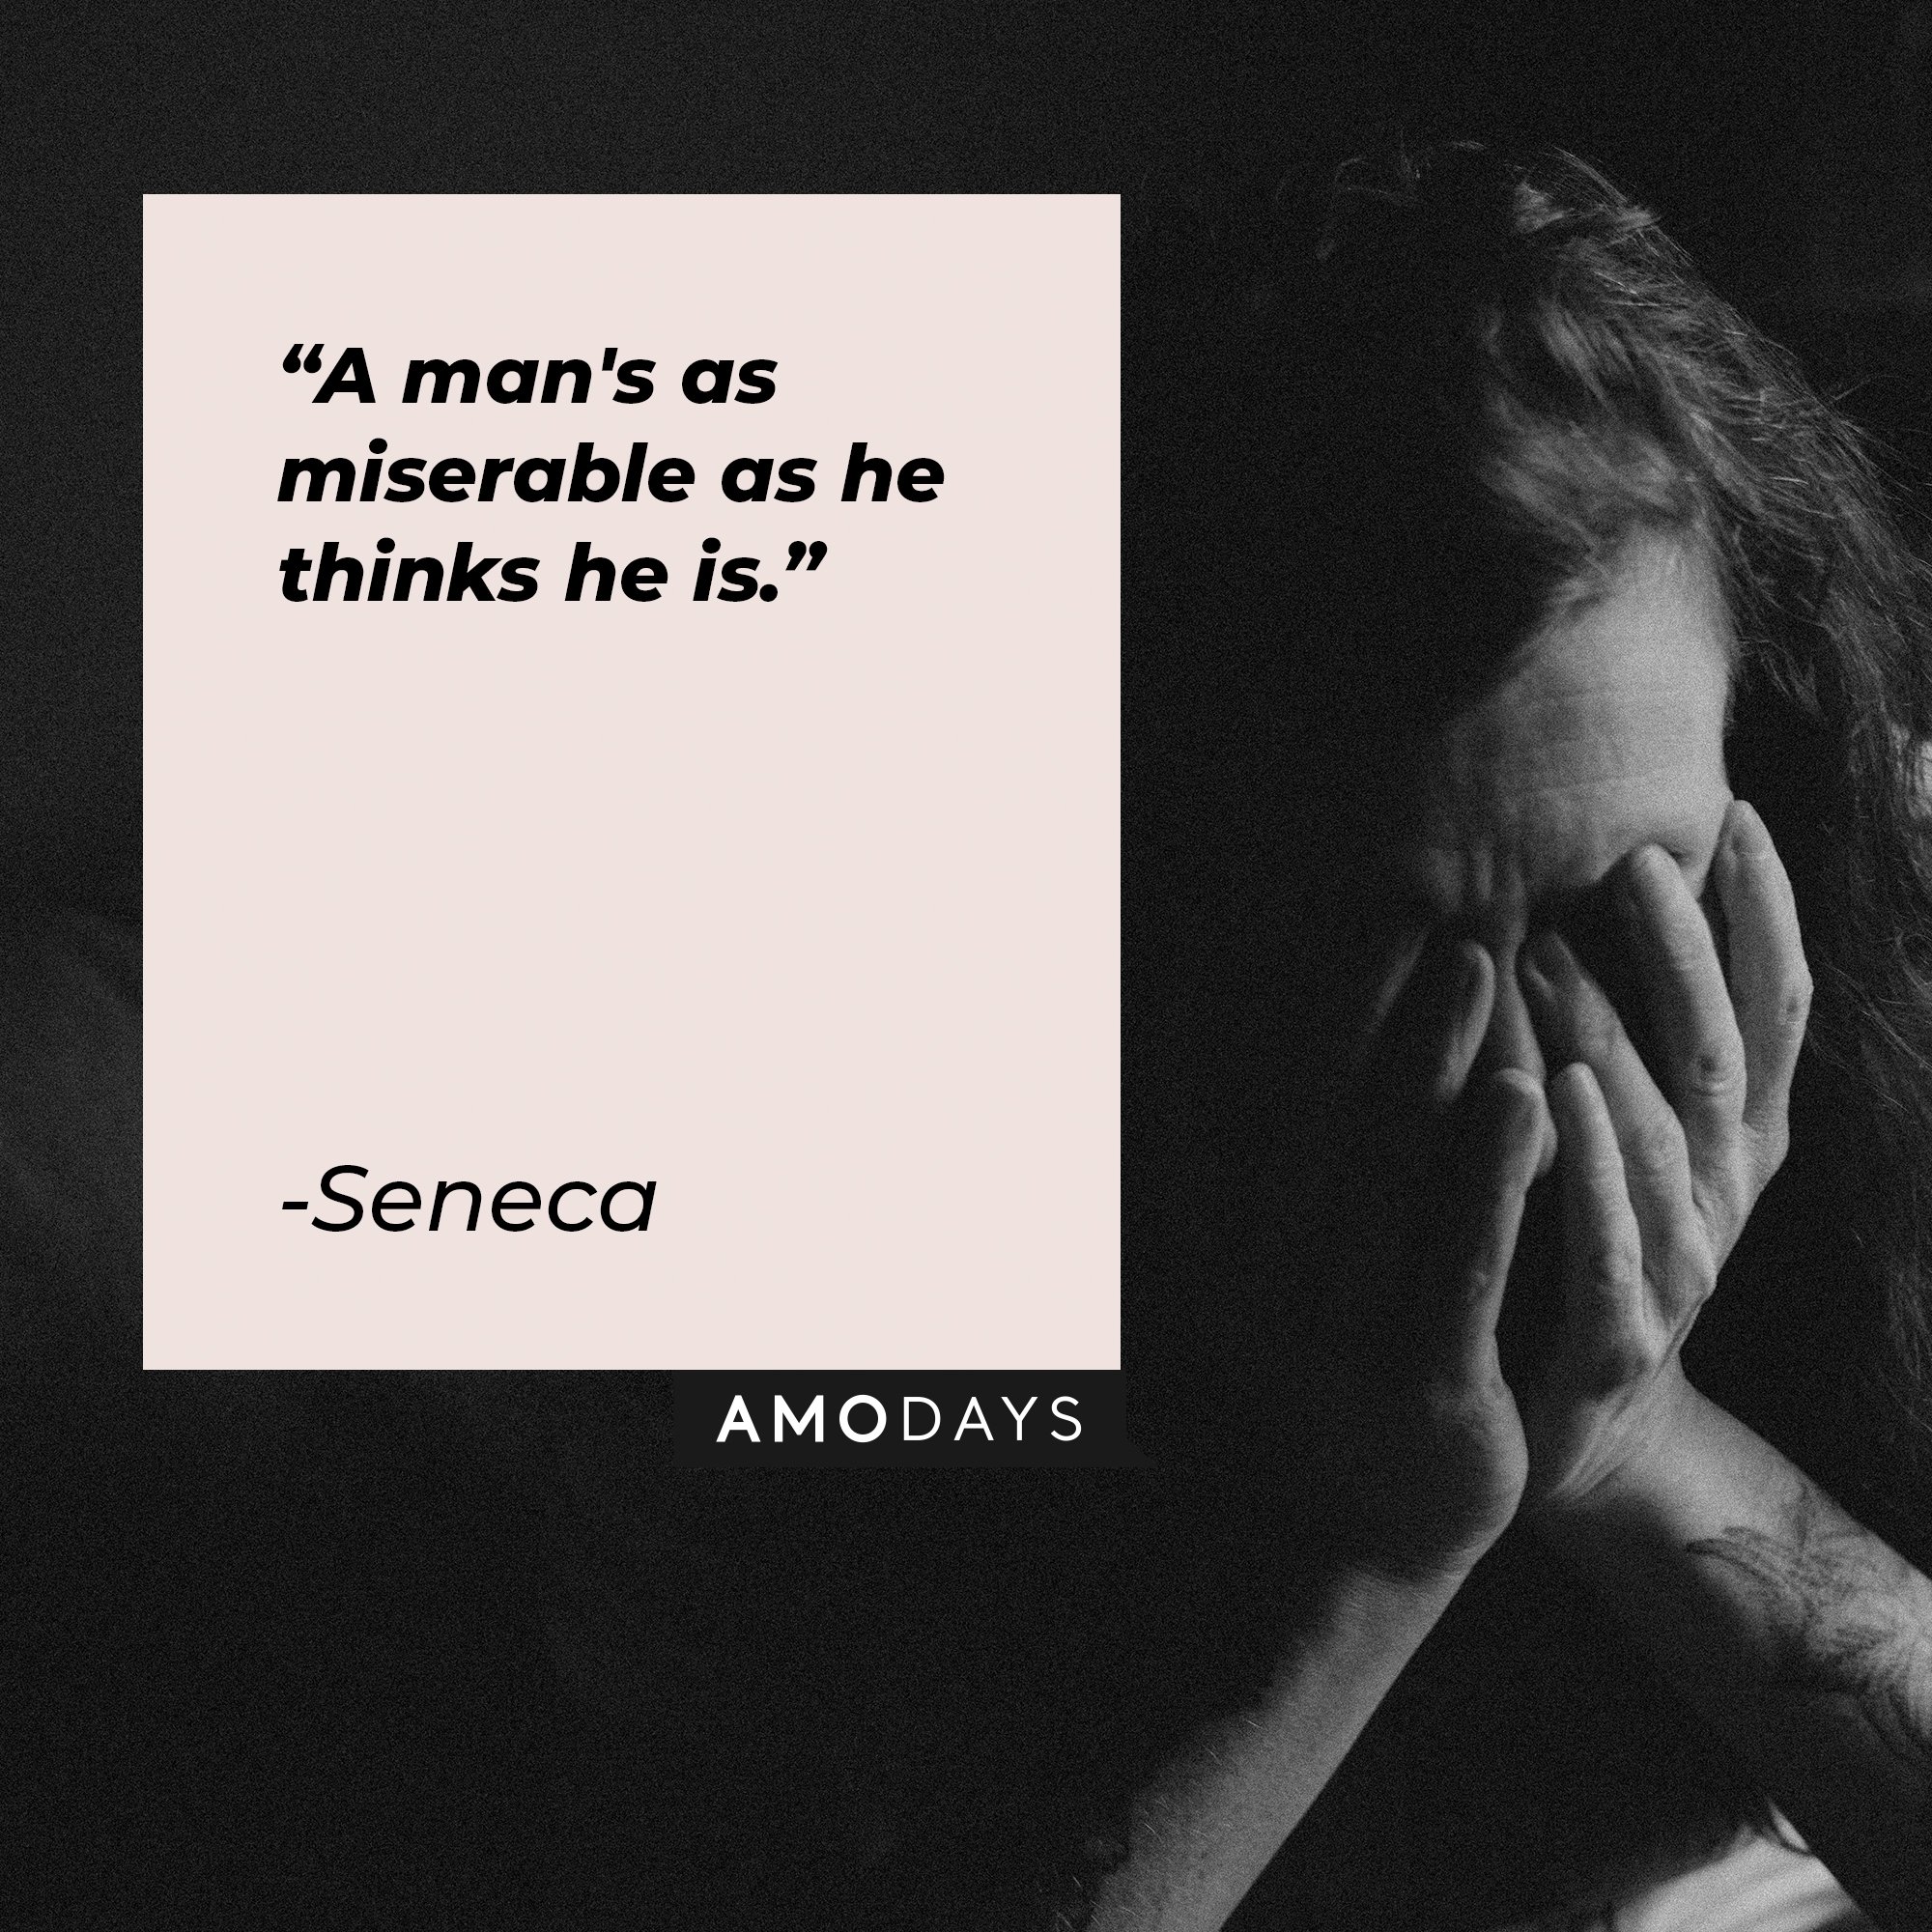 Seneca’s quote: "A man's as miserable as he thinks he is." | Image: AmoDays